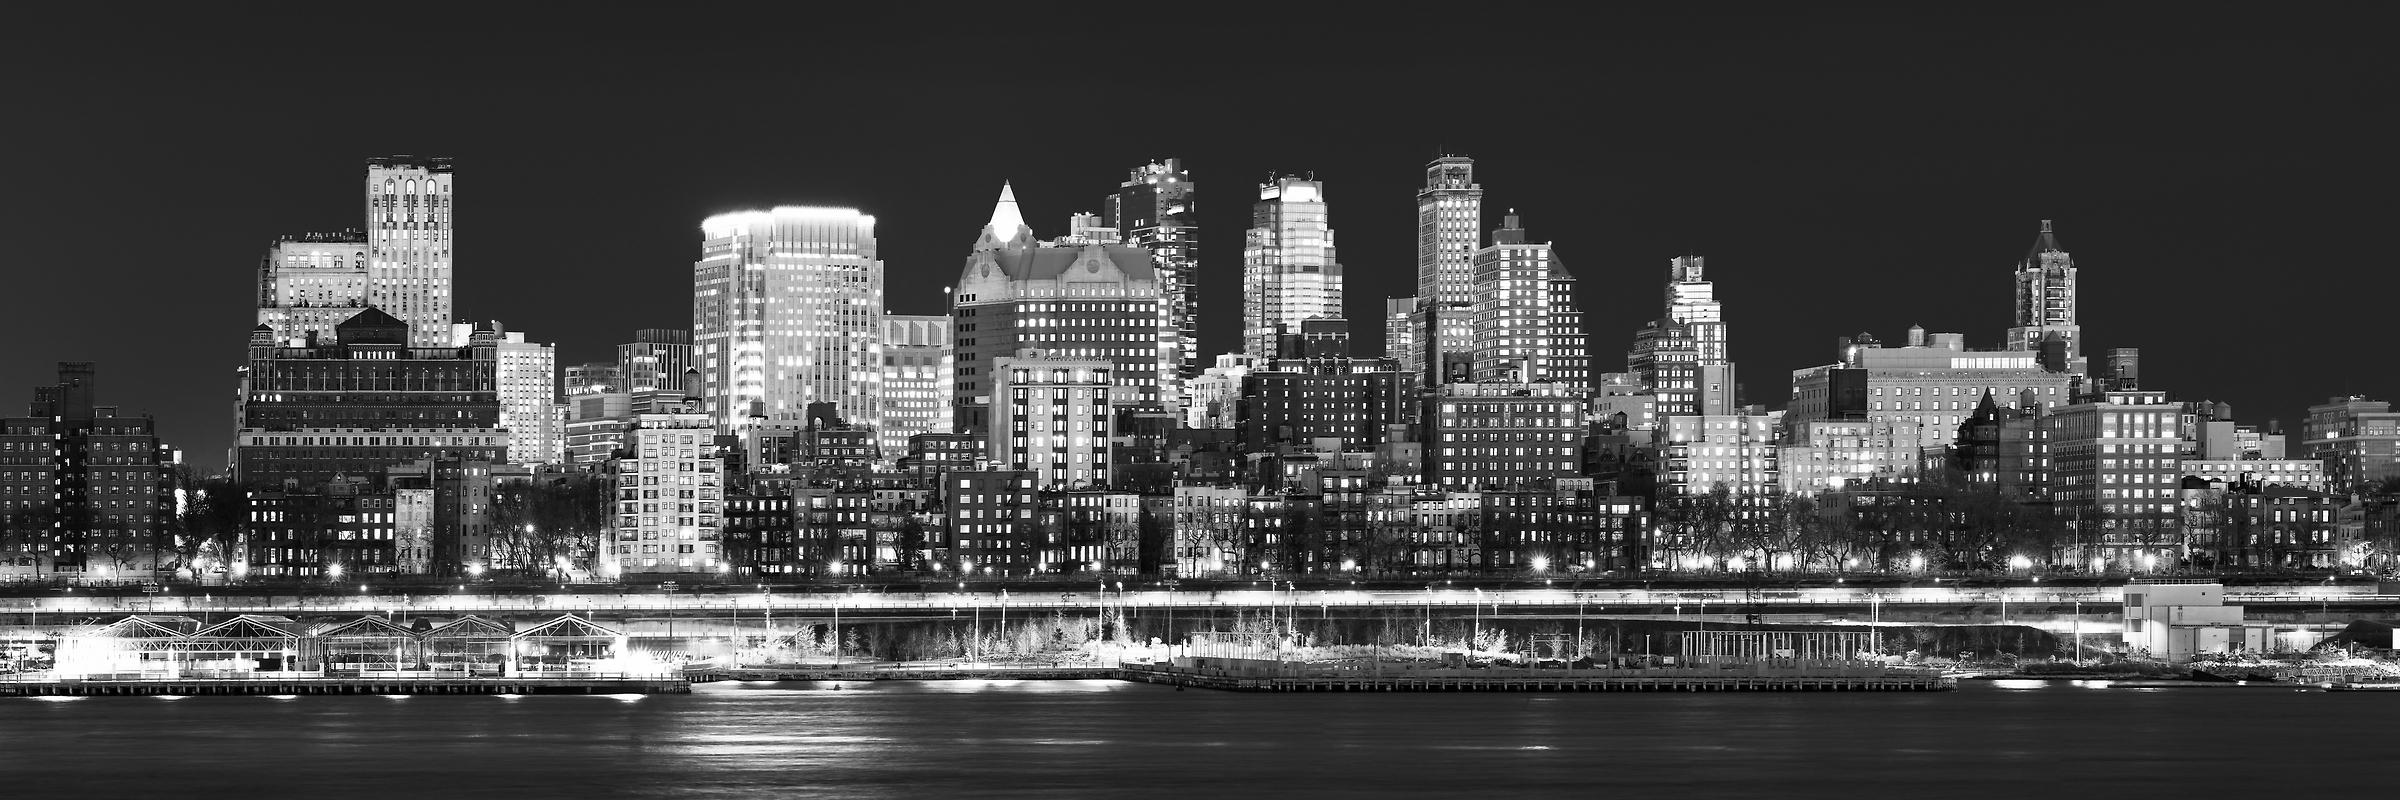 225 megapixels! A very high resolution, large-format VAST photo of the Downtown Brooklyn and Brooklyn Heights skyline at sunset dusk; fine art black and white cityscape photograph created by Dan Piech in New York City